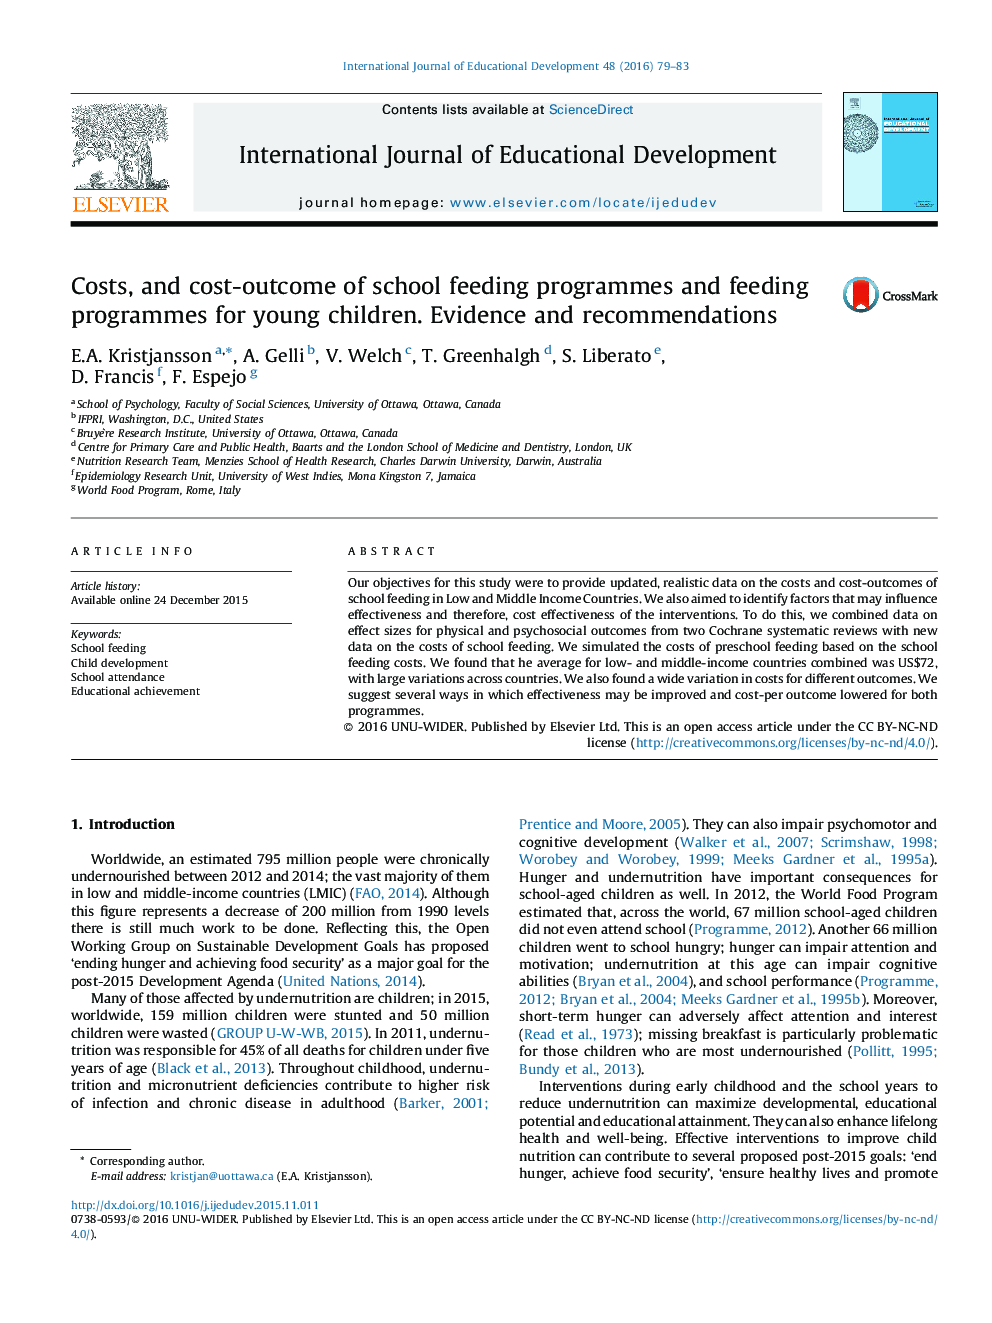 Costs, and cost-outcome of school feeding programmes and feeding programmes for young children. Evidence and recommendations